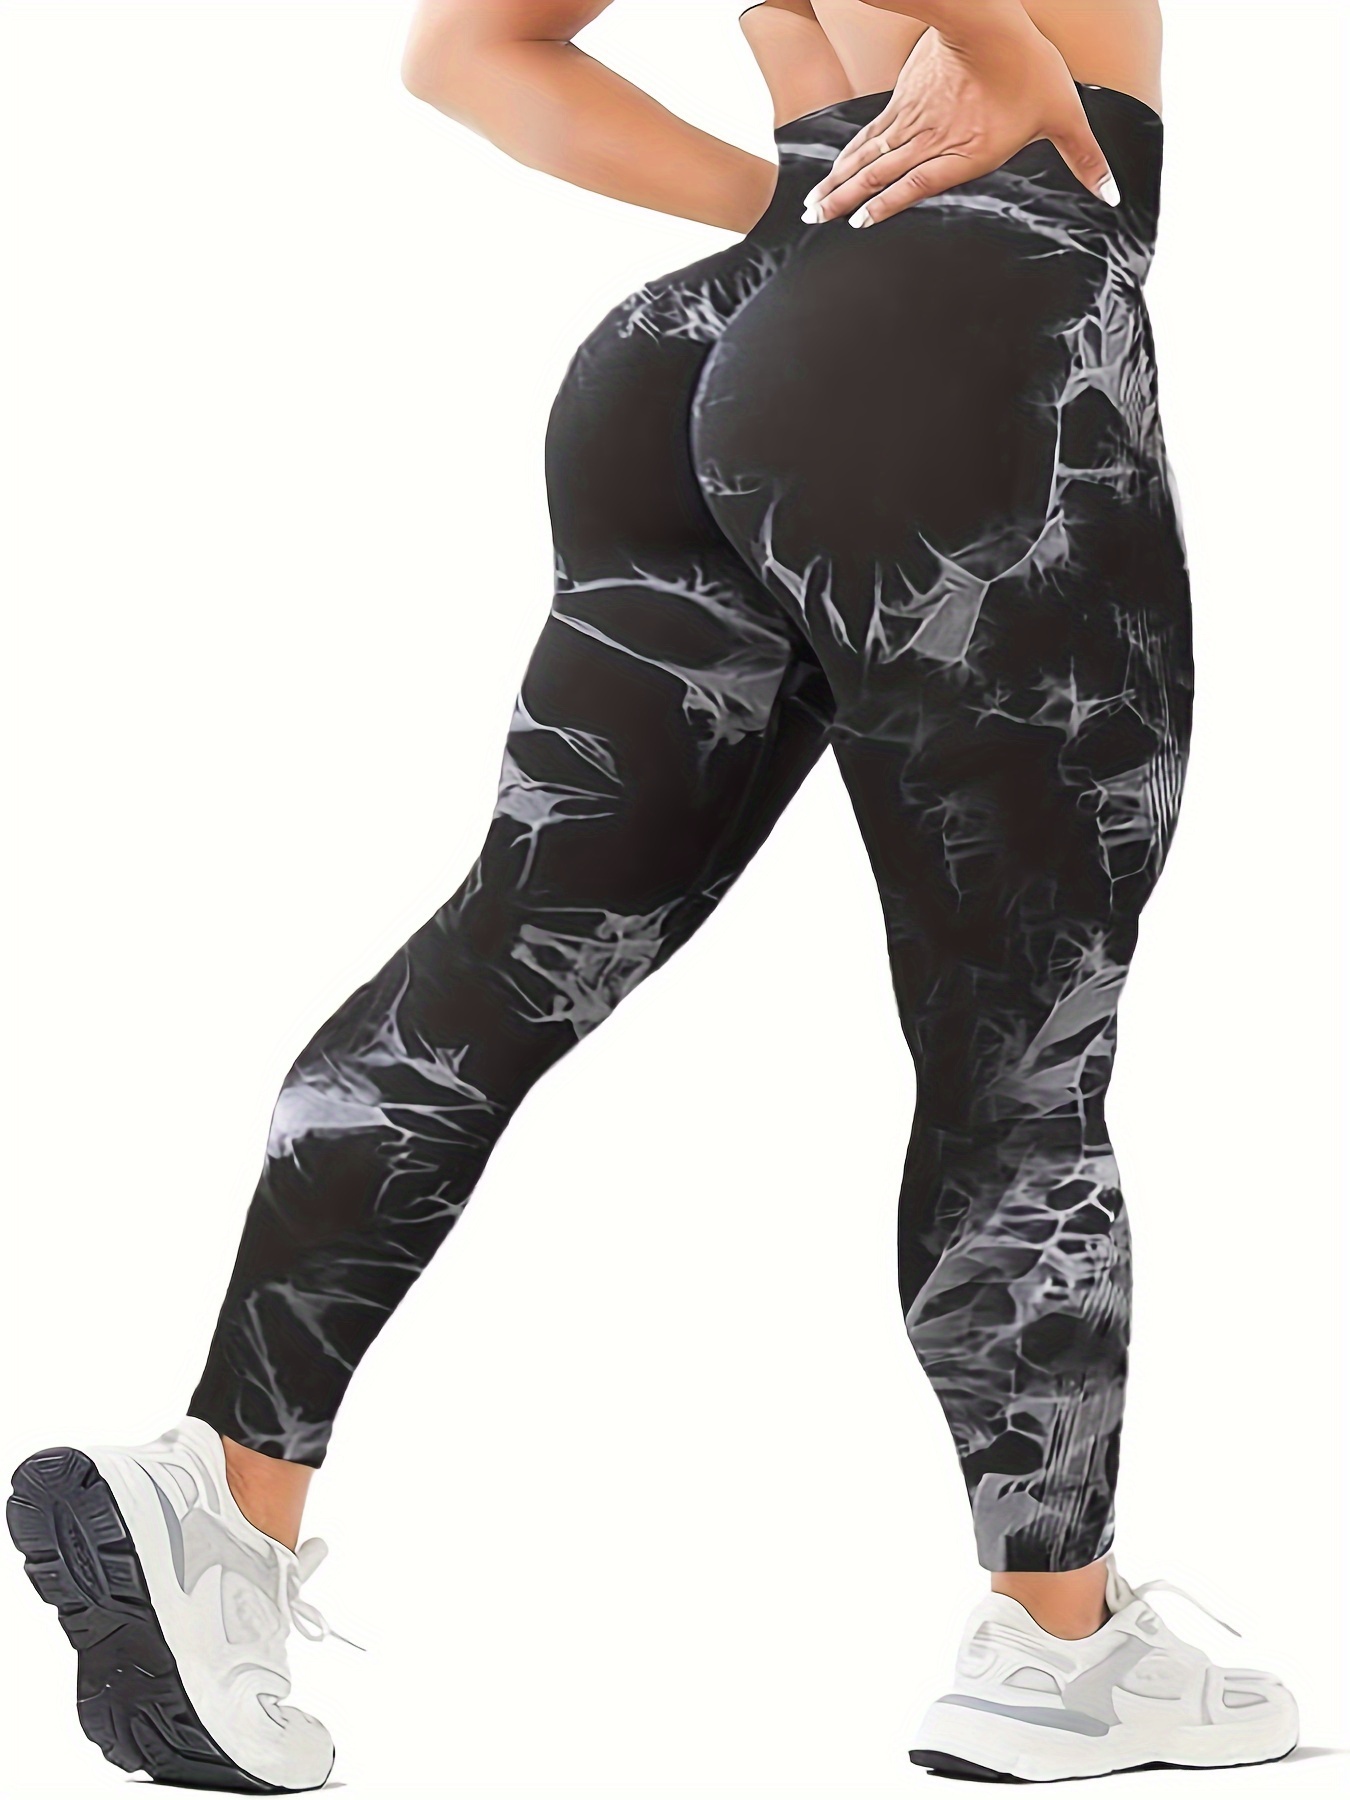 LLU Womens Designer Warm Best Yoga Leggings Comfortable Fabric For Yoga,  Running, And Fitness Hip Training And Spring Wear From Premium_fashion,  $18.81